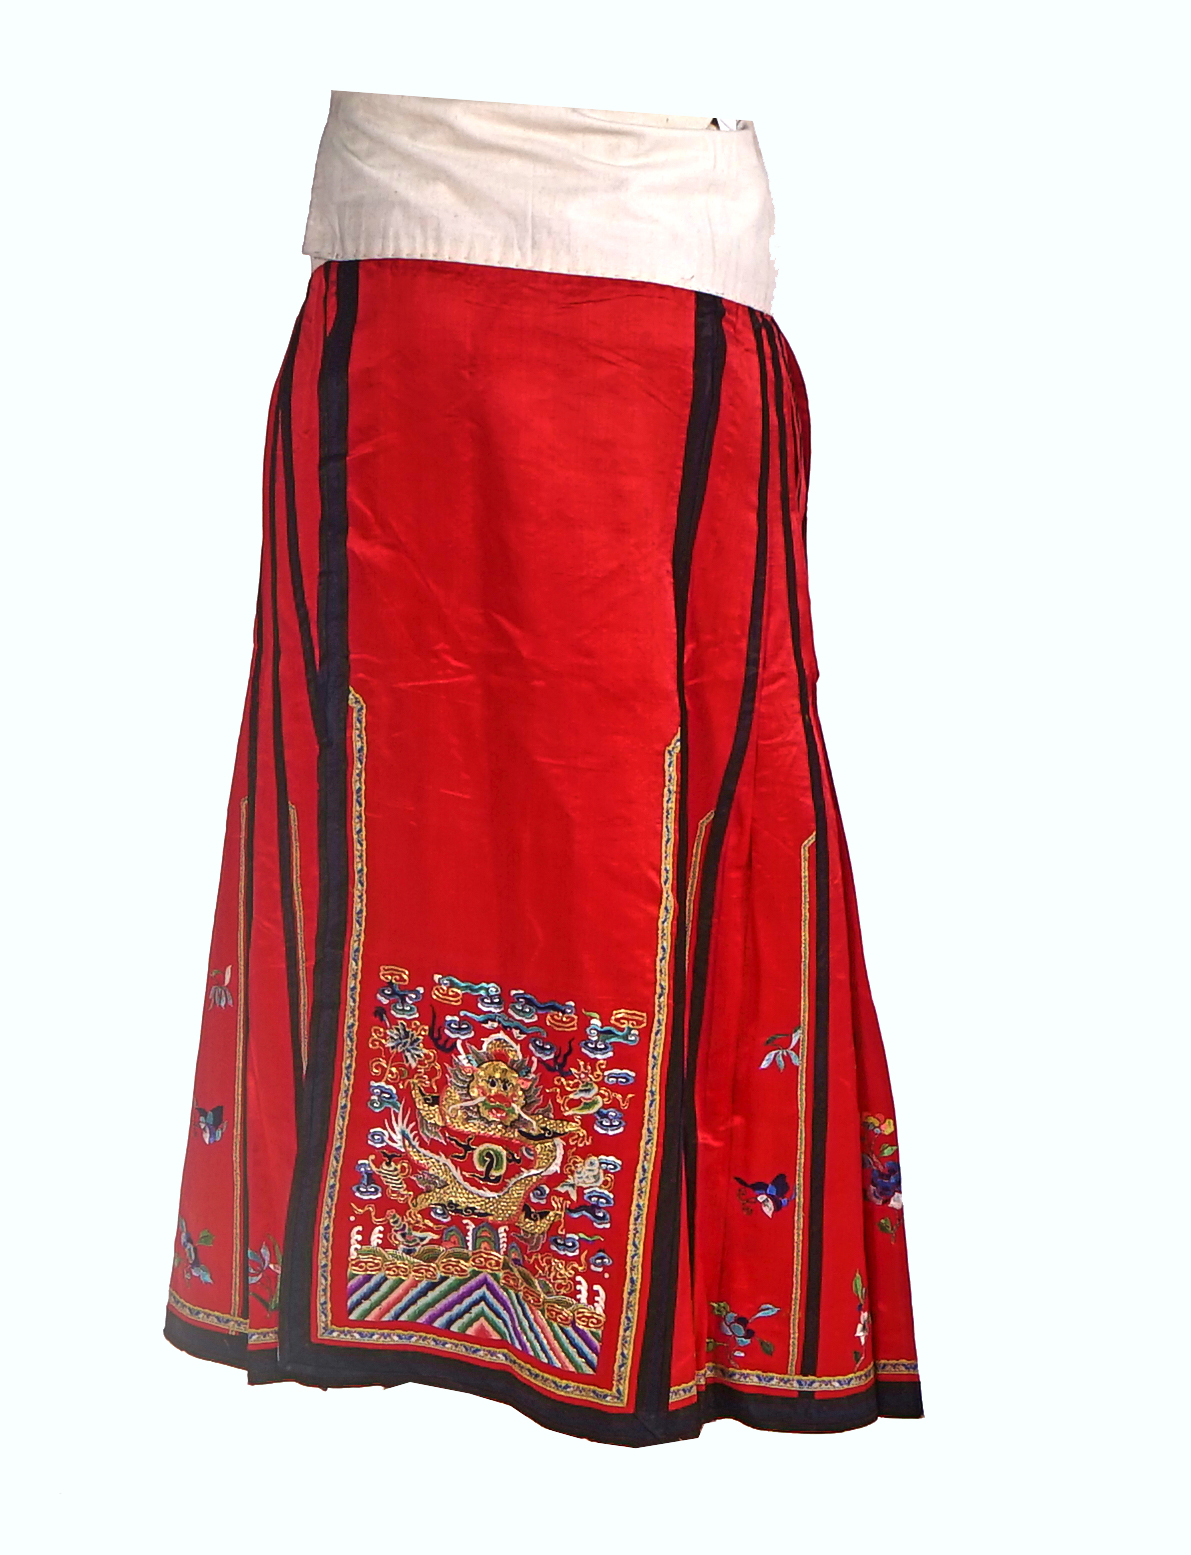 TWO CHINESE EMBROIDERED SILK APRON SKIRTS - Image 4 of 5